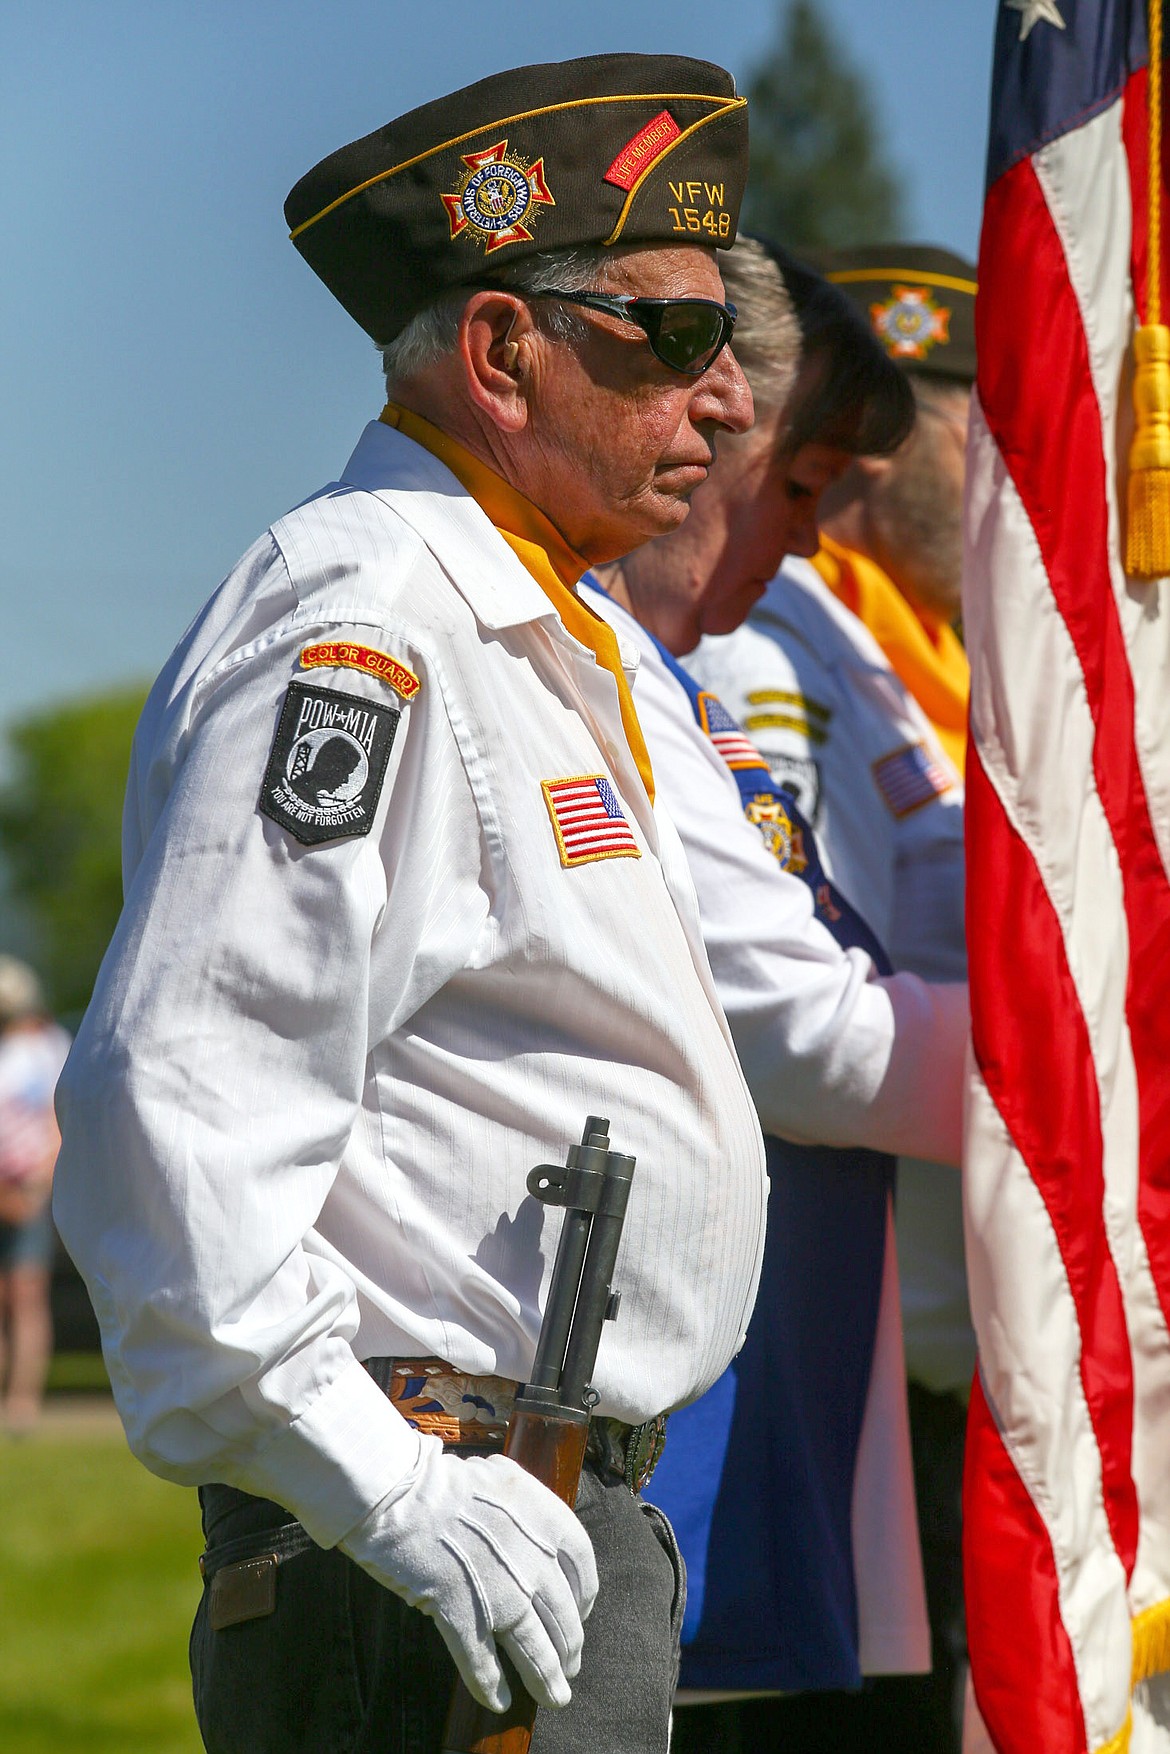 Keith Kenelty of VFW Post No. 1548 stands at attention as part of the color guard during a Memorial Day ceremony at Libby Cemetery Monday, May 29, 2017. (John Blodgett/The Western News)